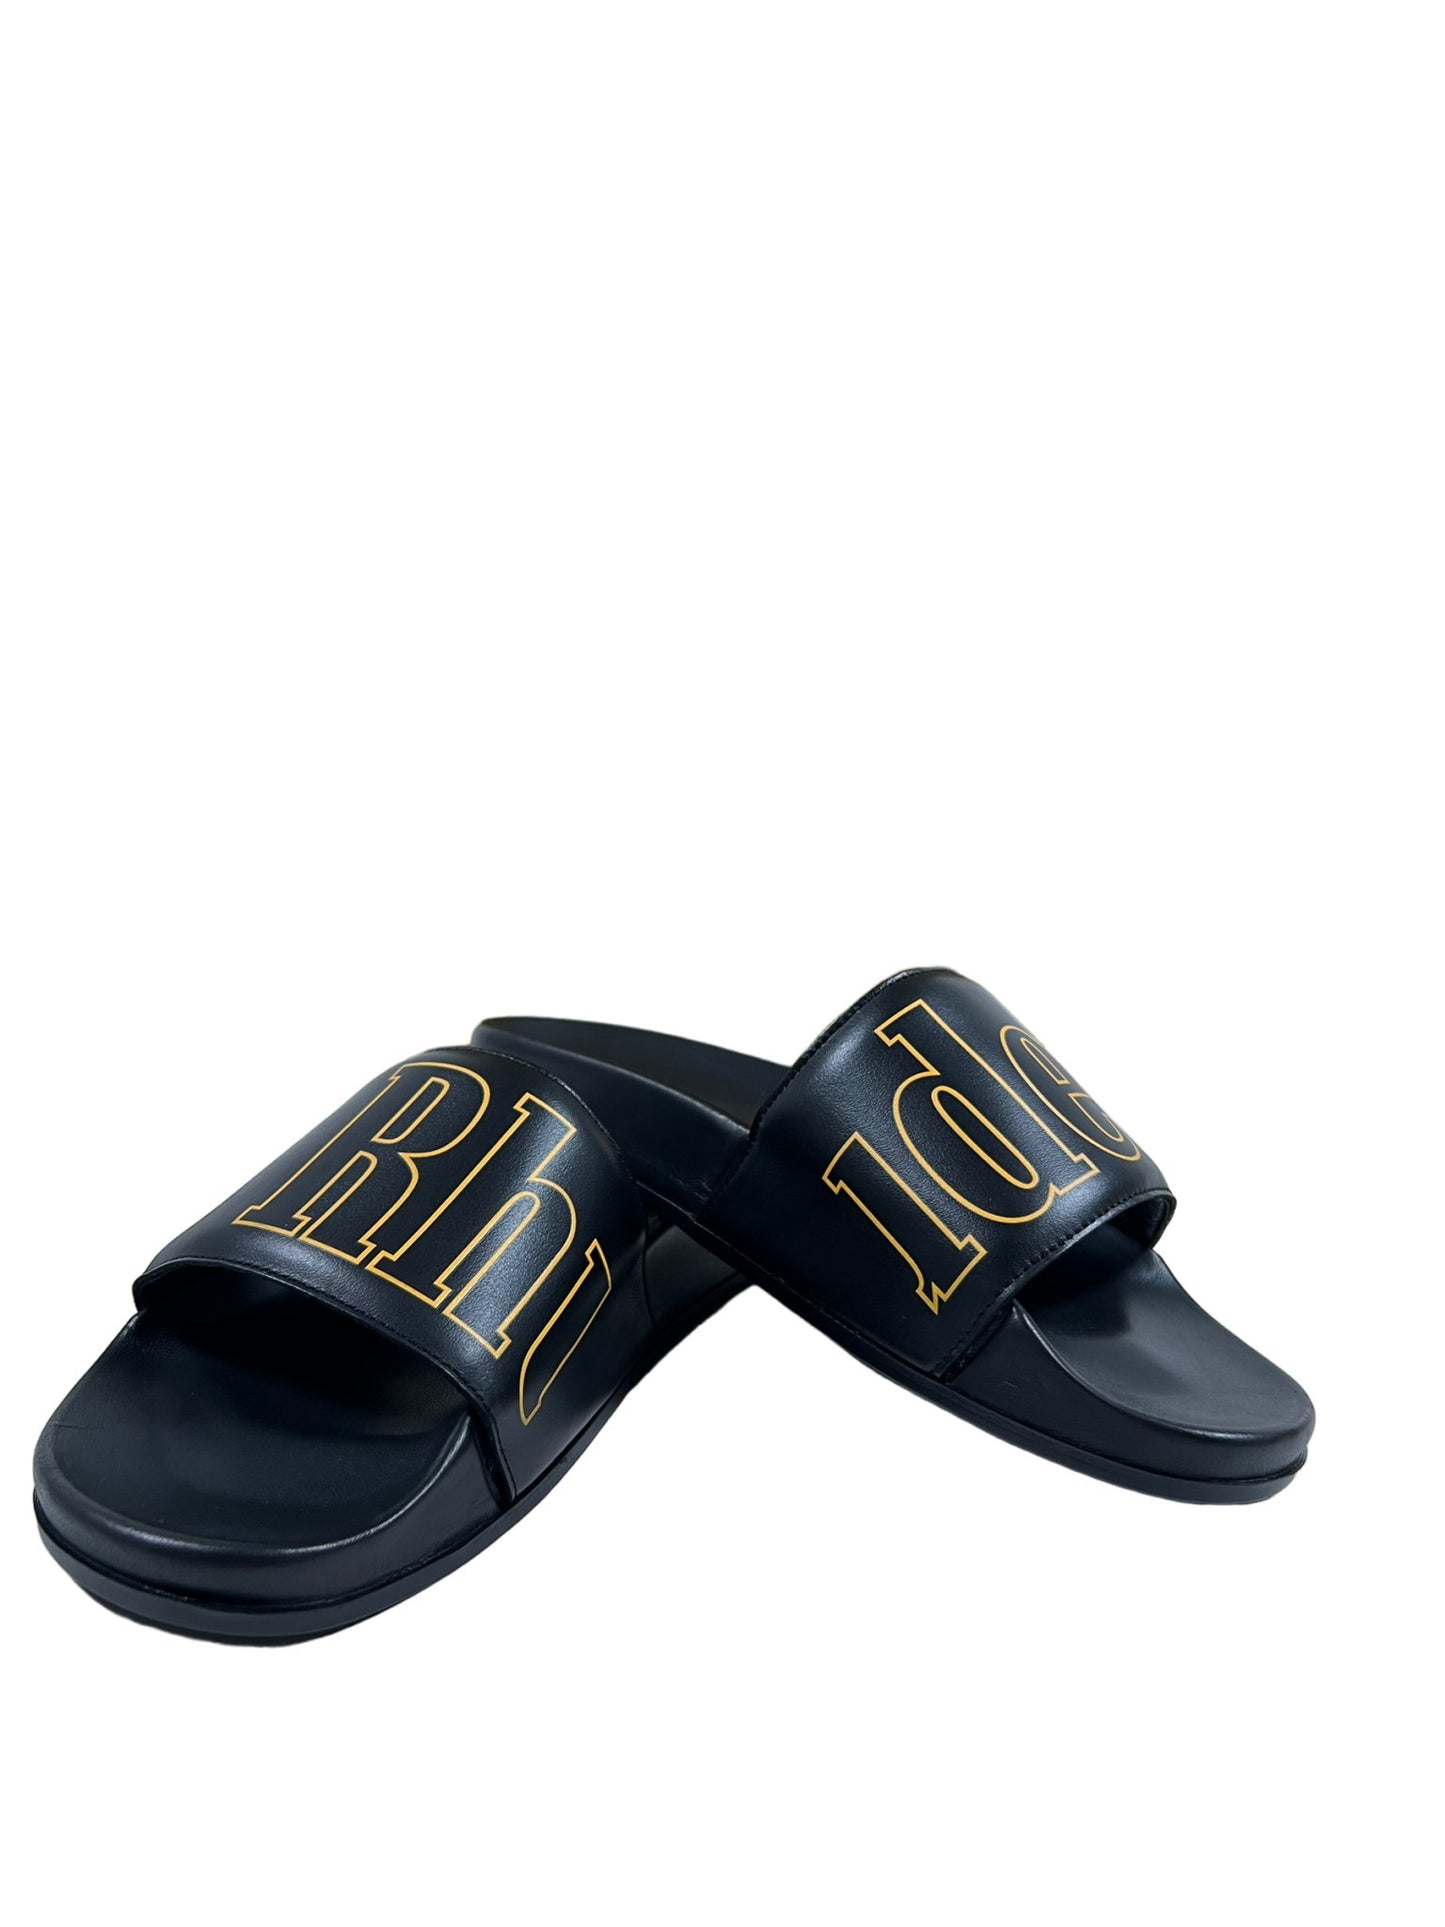 A pair of RHUDE Leather Slides in black with yellow lettering, made in Italy.